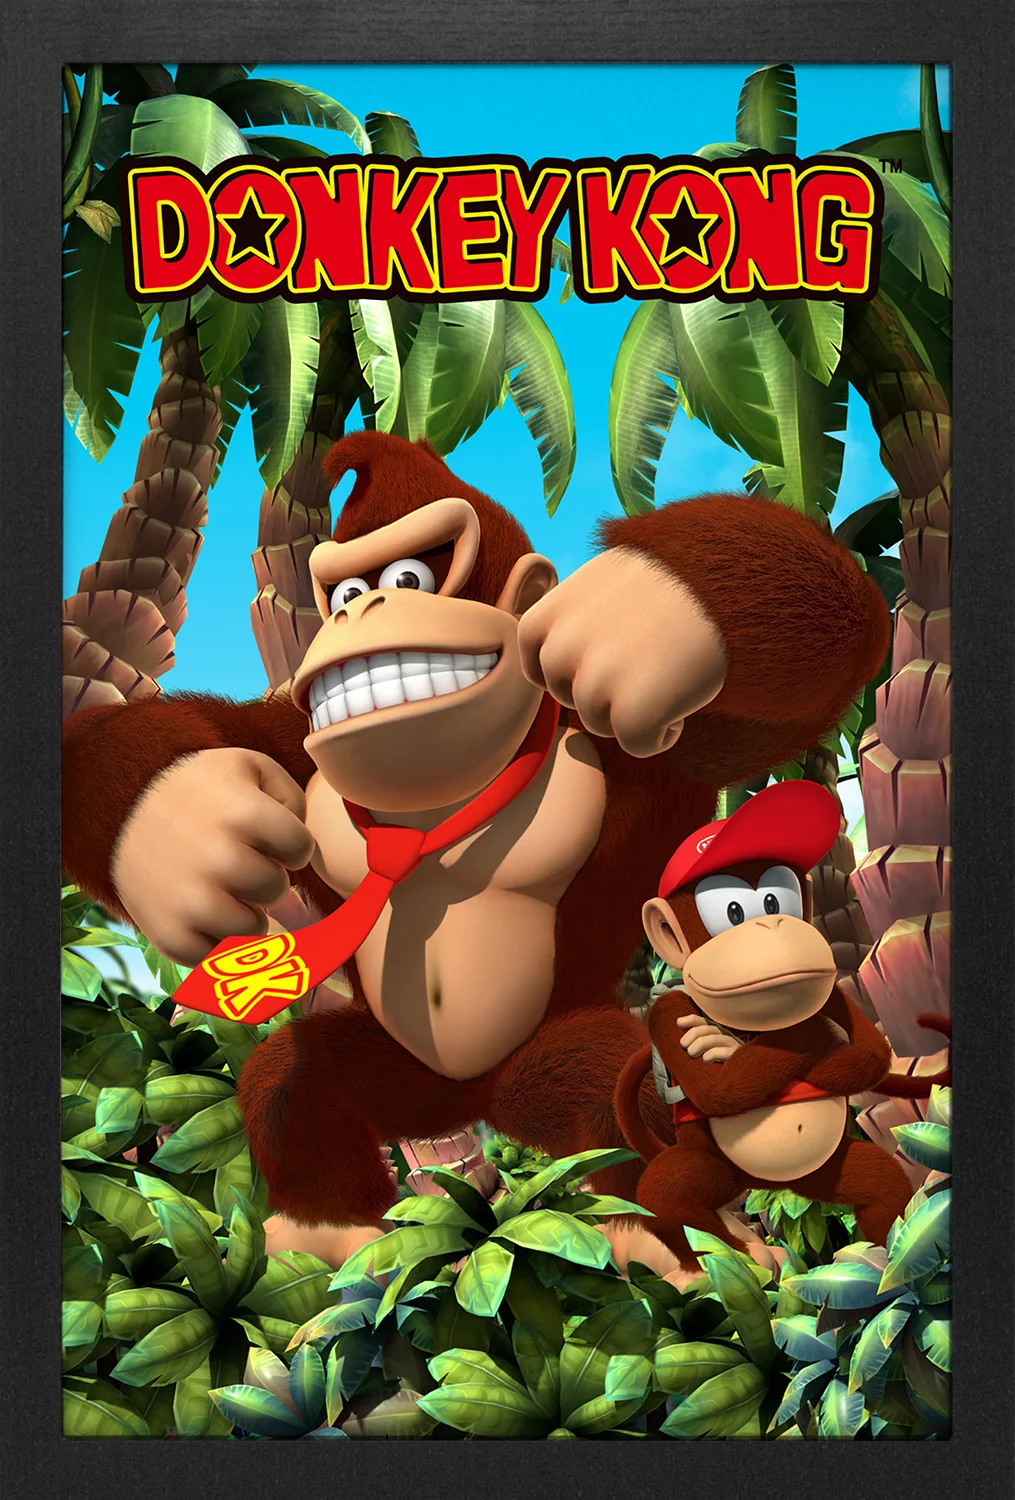 Donkey Kong & Diddy Kong (11"x17" Gel-Coat) (Order in multiples of 6, mix and match styles)